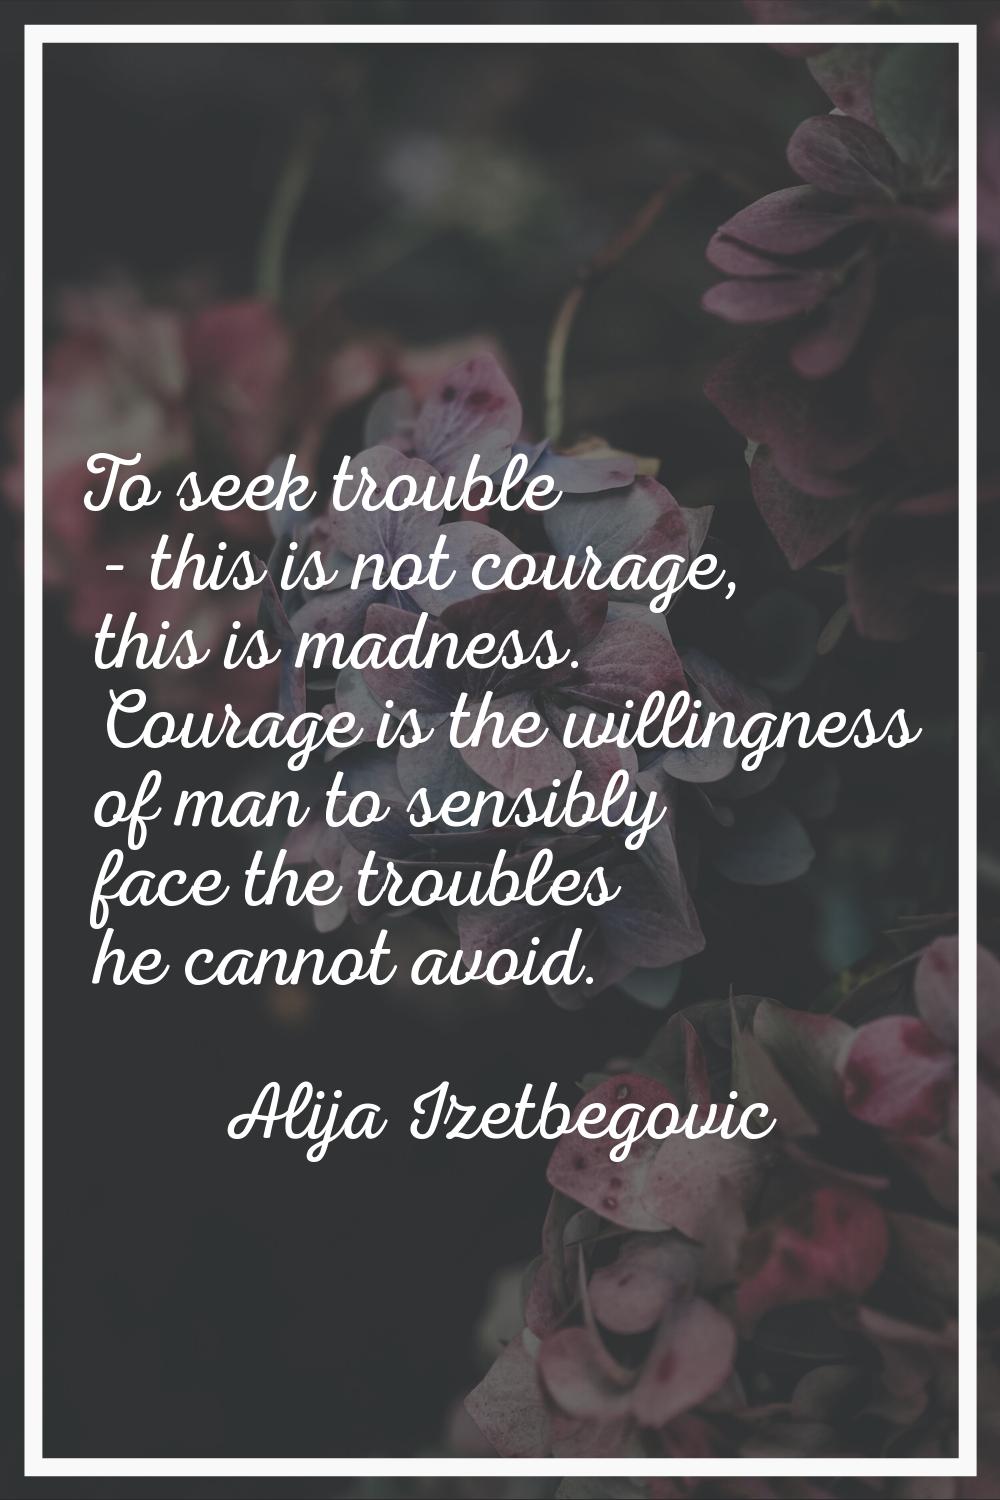 To seek trouble - this is not courage, this is madness. Courage is the willingness of man to sensib